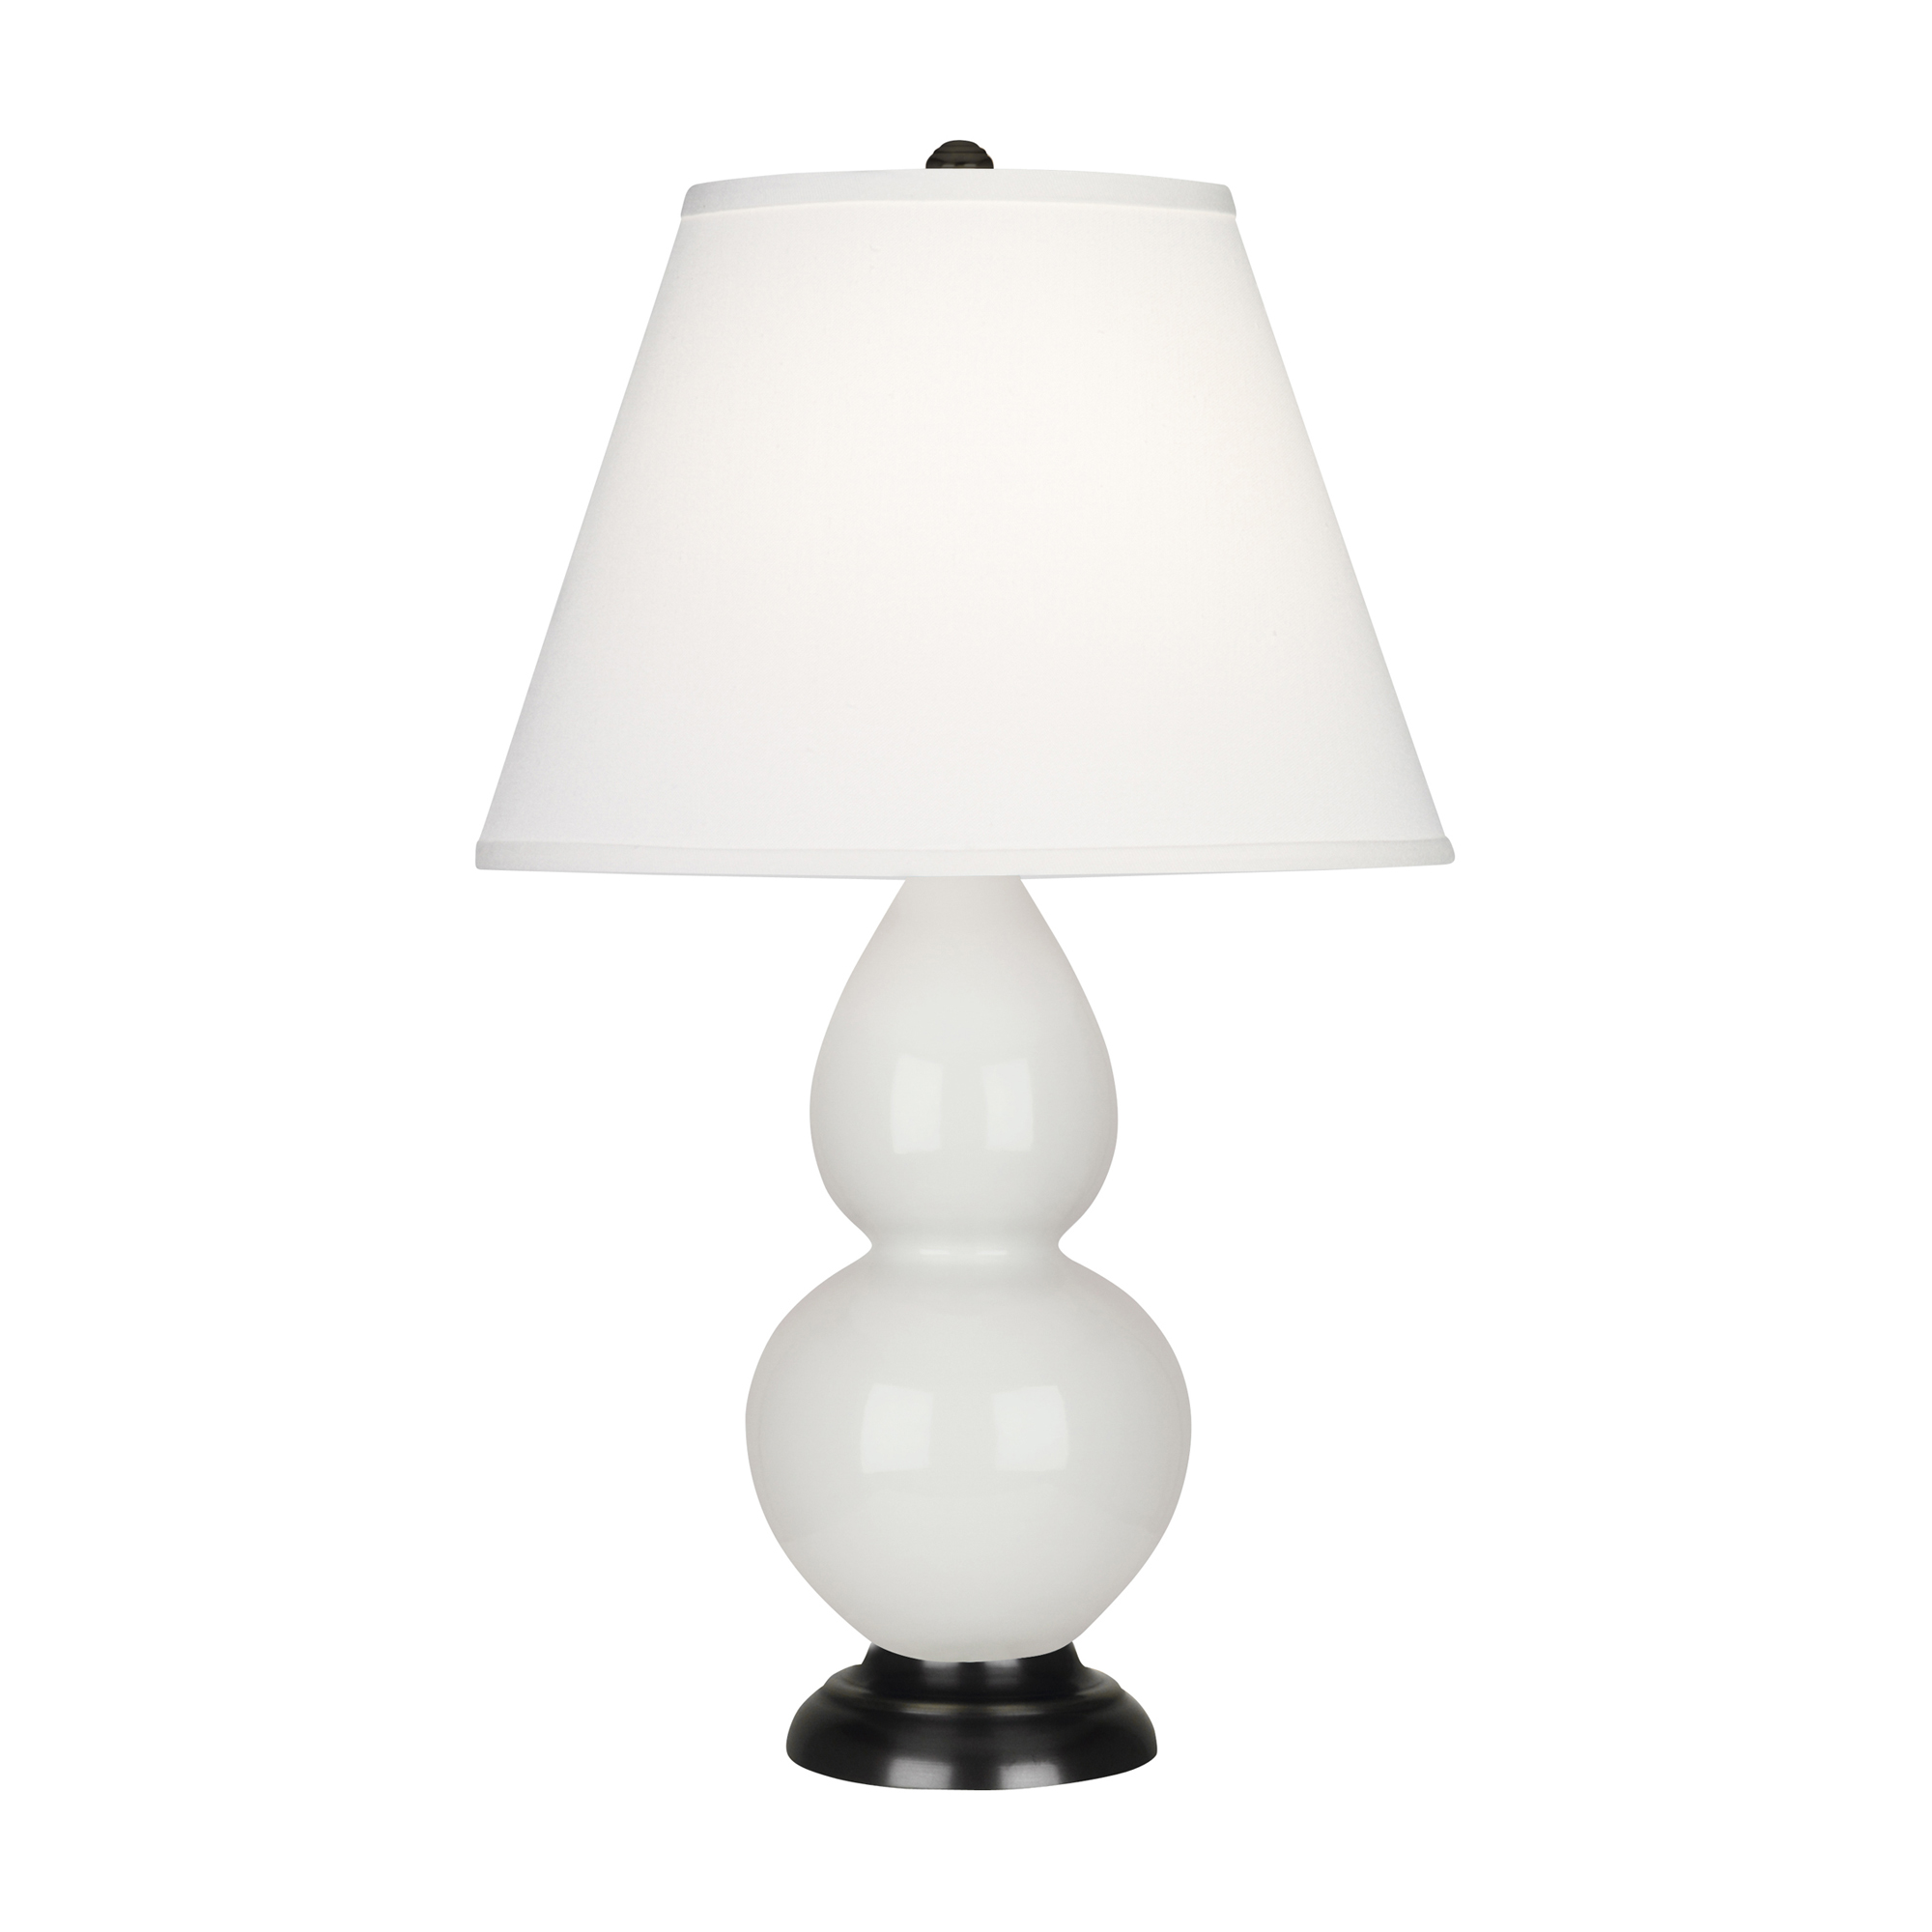 Small Double Gourd Accent Lamp Style #1650X